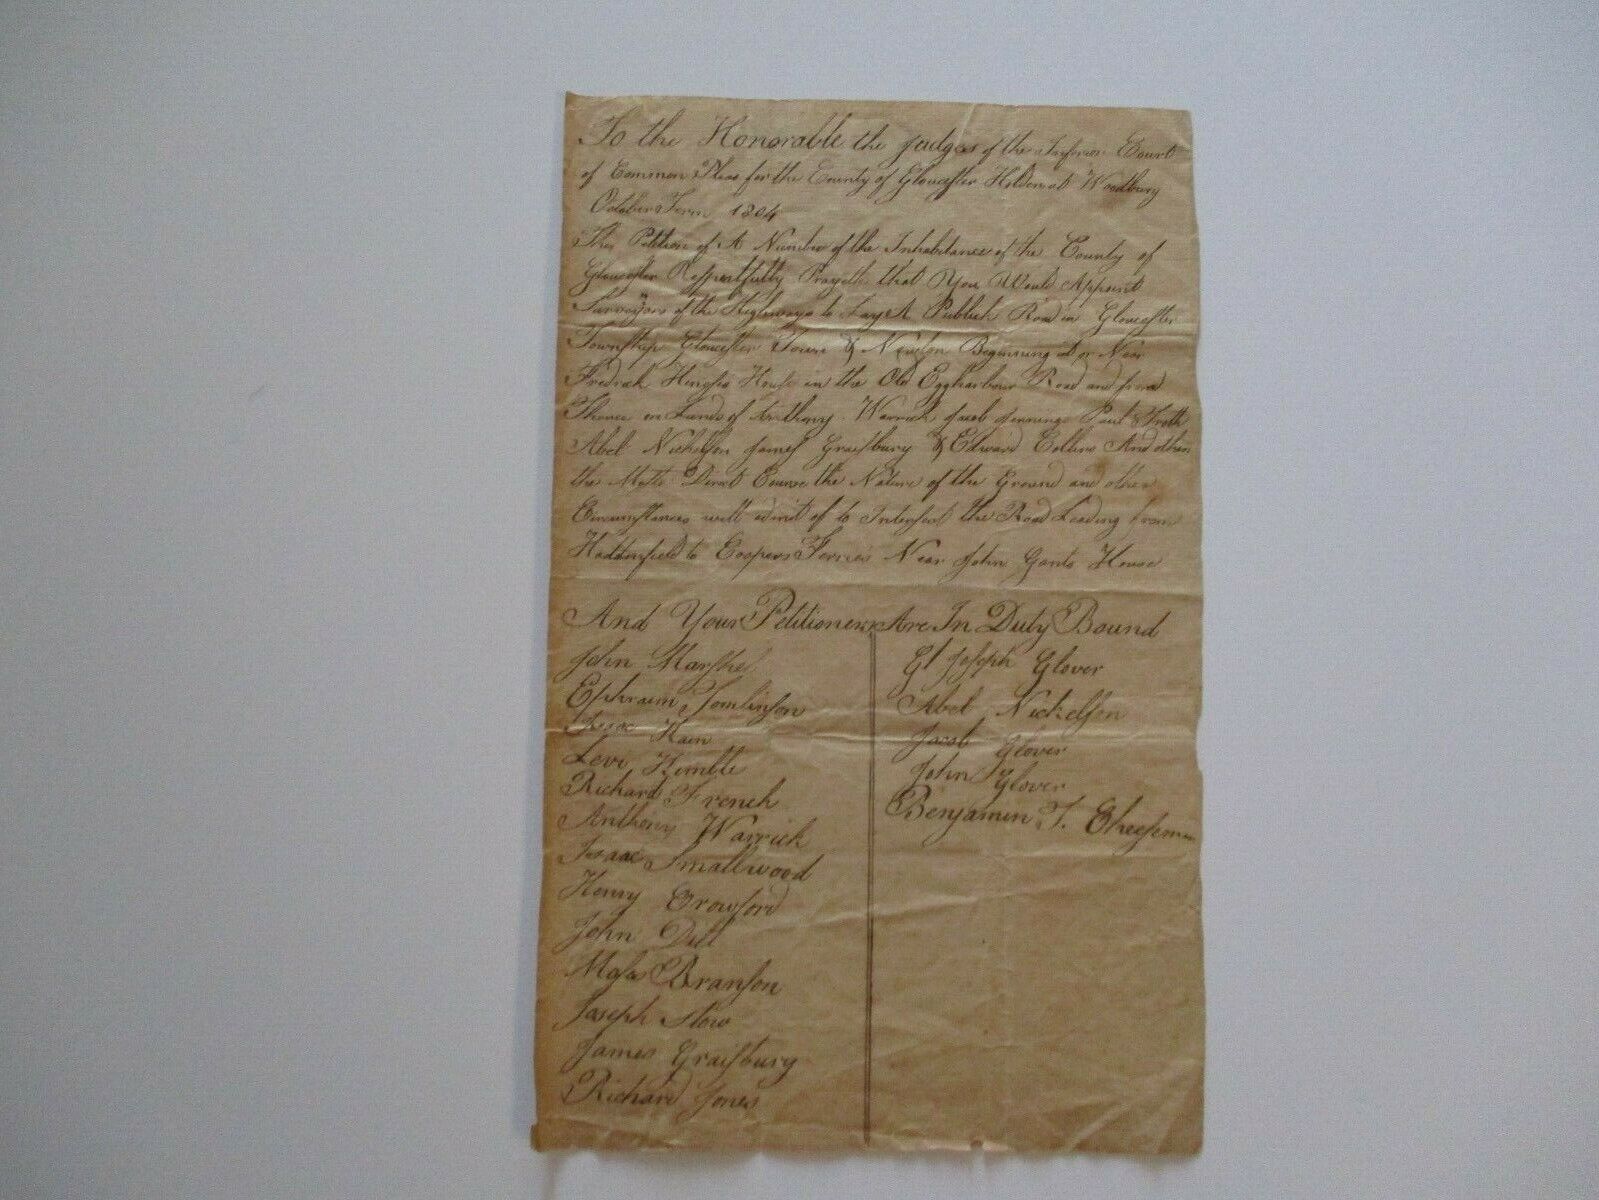 ANTIQUE EARLY AMERICAN DOCUMENT GLOUCESTER COUNTY 1804 PETITIONERS RARE OLD